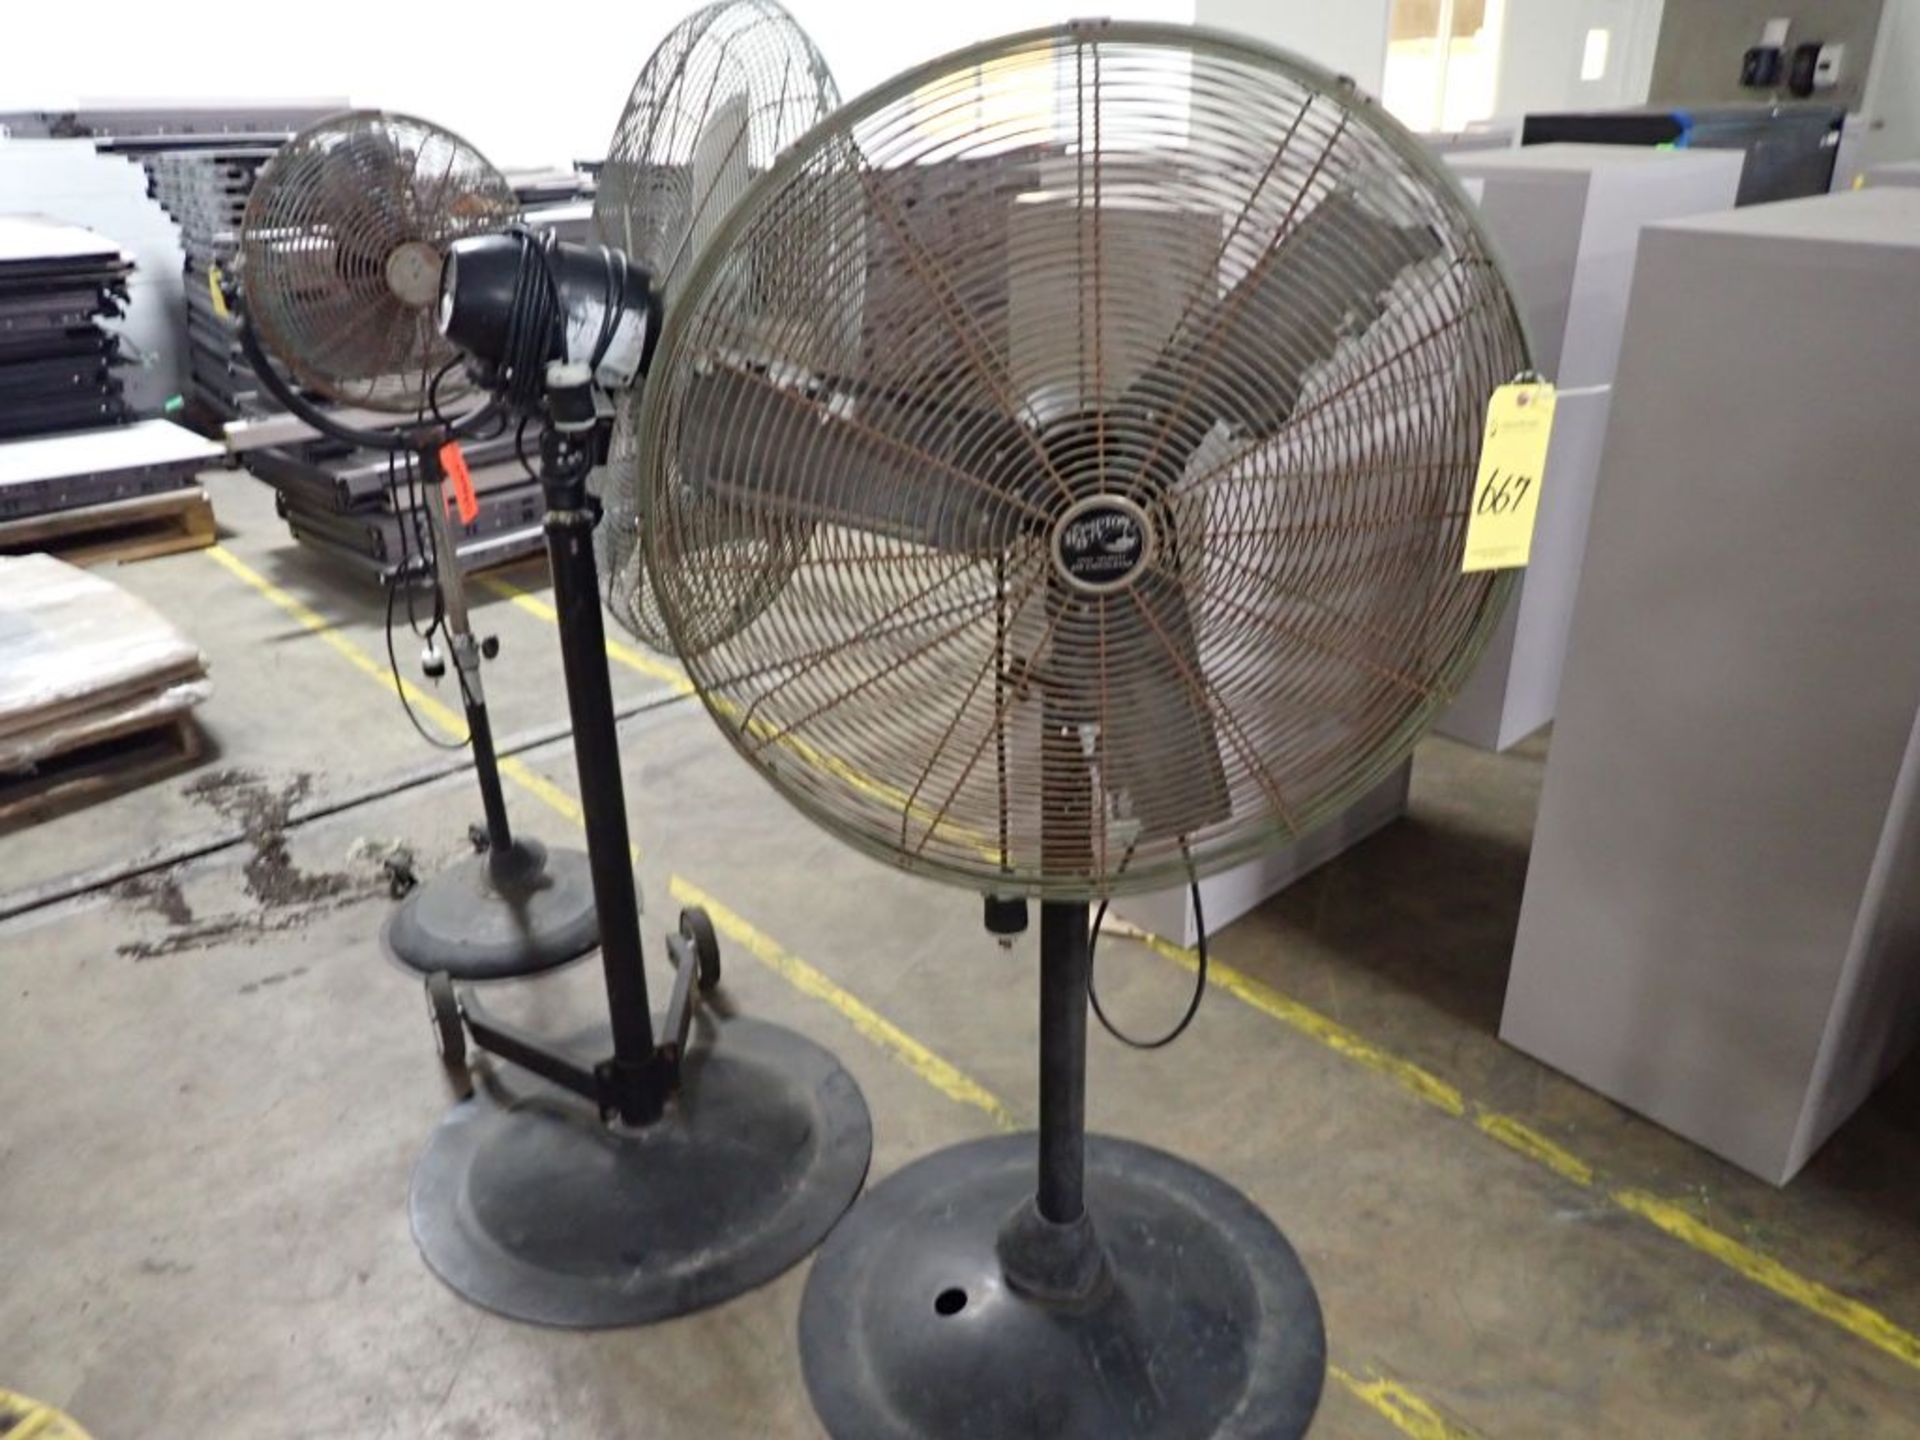 Lot of (3) Fans | Tag: 241667 | Limited Forklift Assistance Available - $10.00 Lot Loading Fee